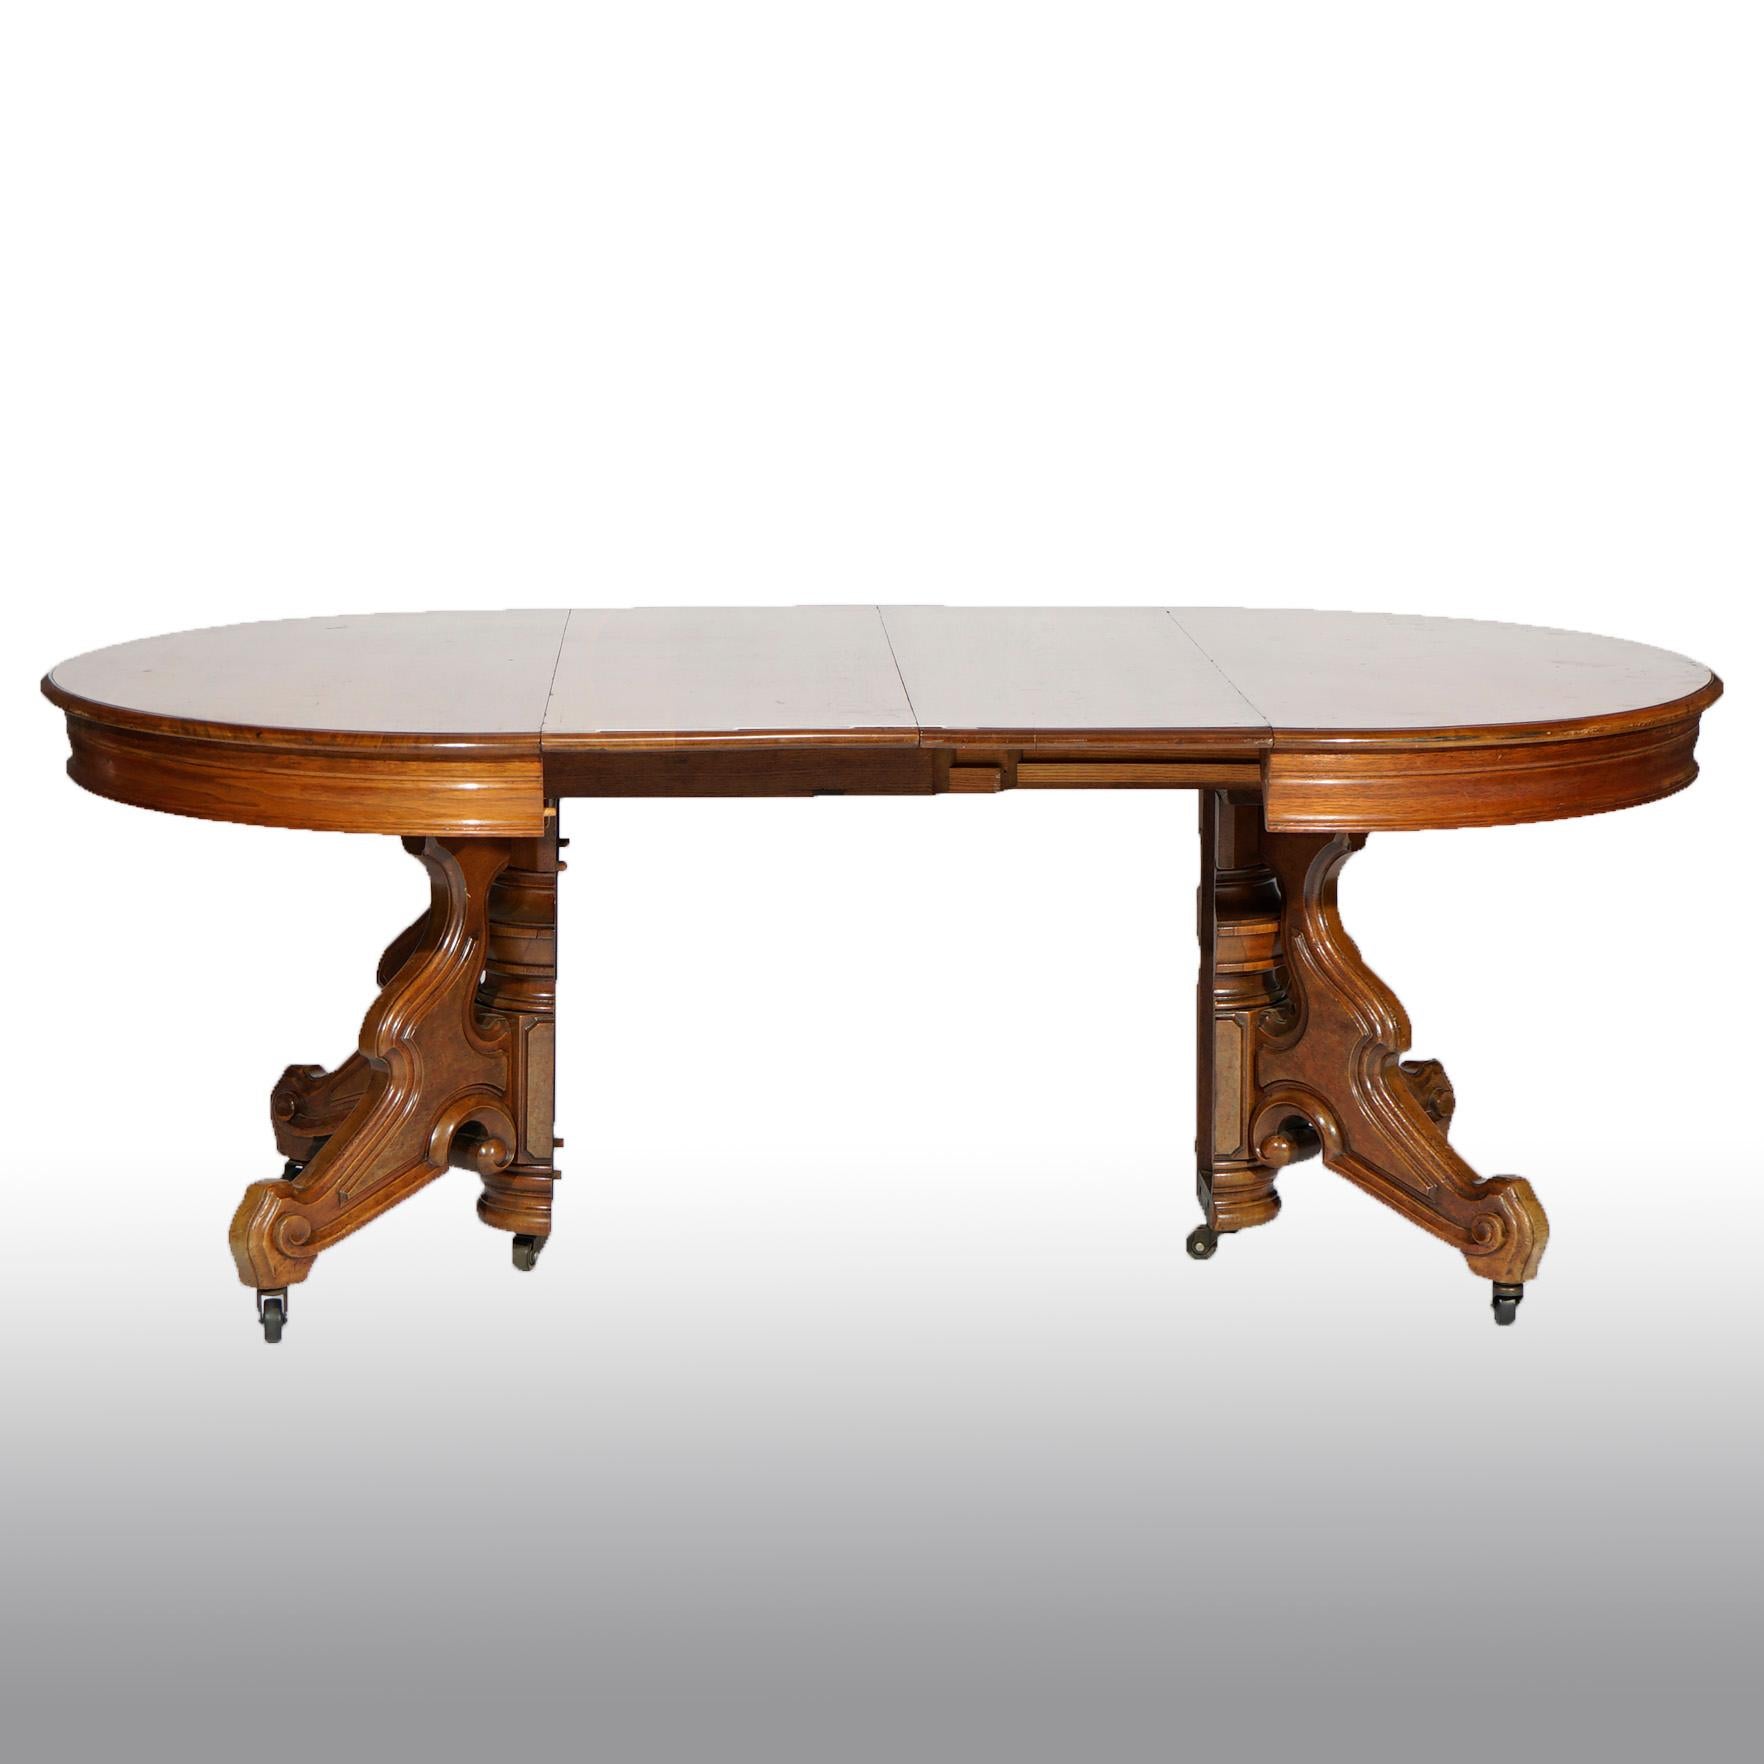 Antique Victorian Round Walnut Extension Dining Table with Six Leaves 19th C 2